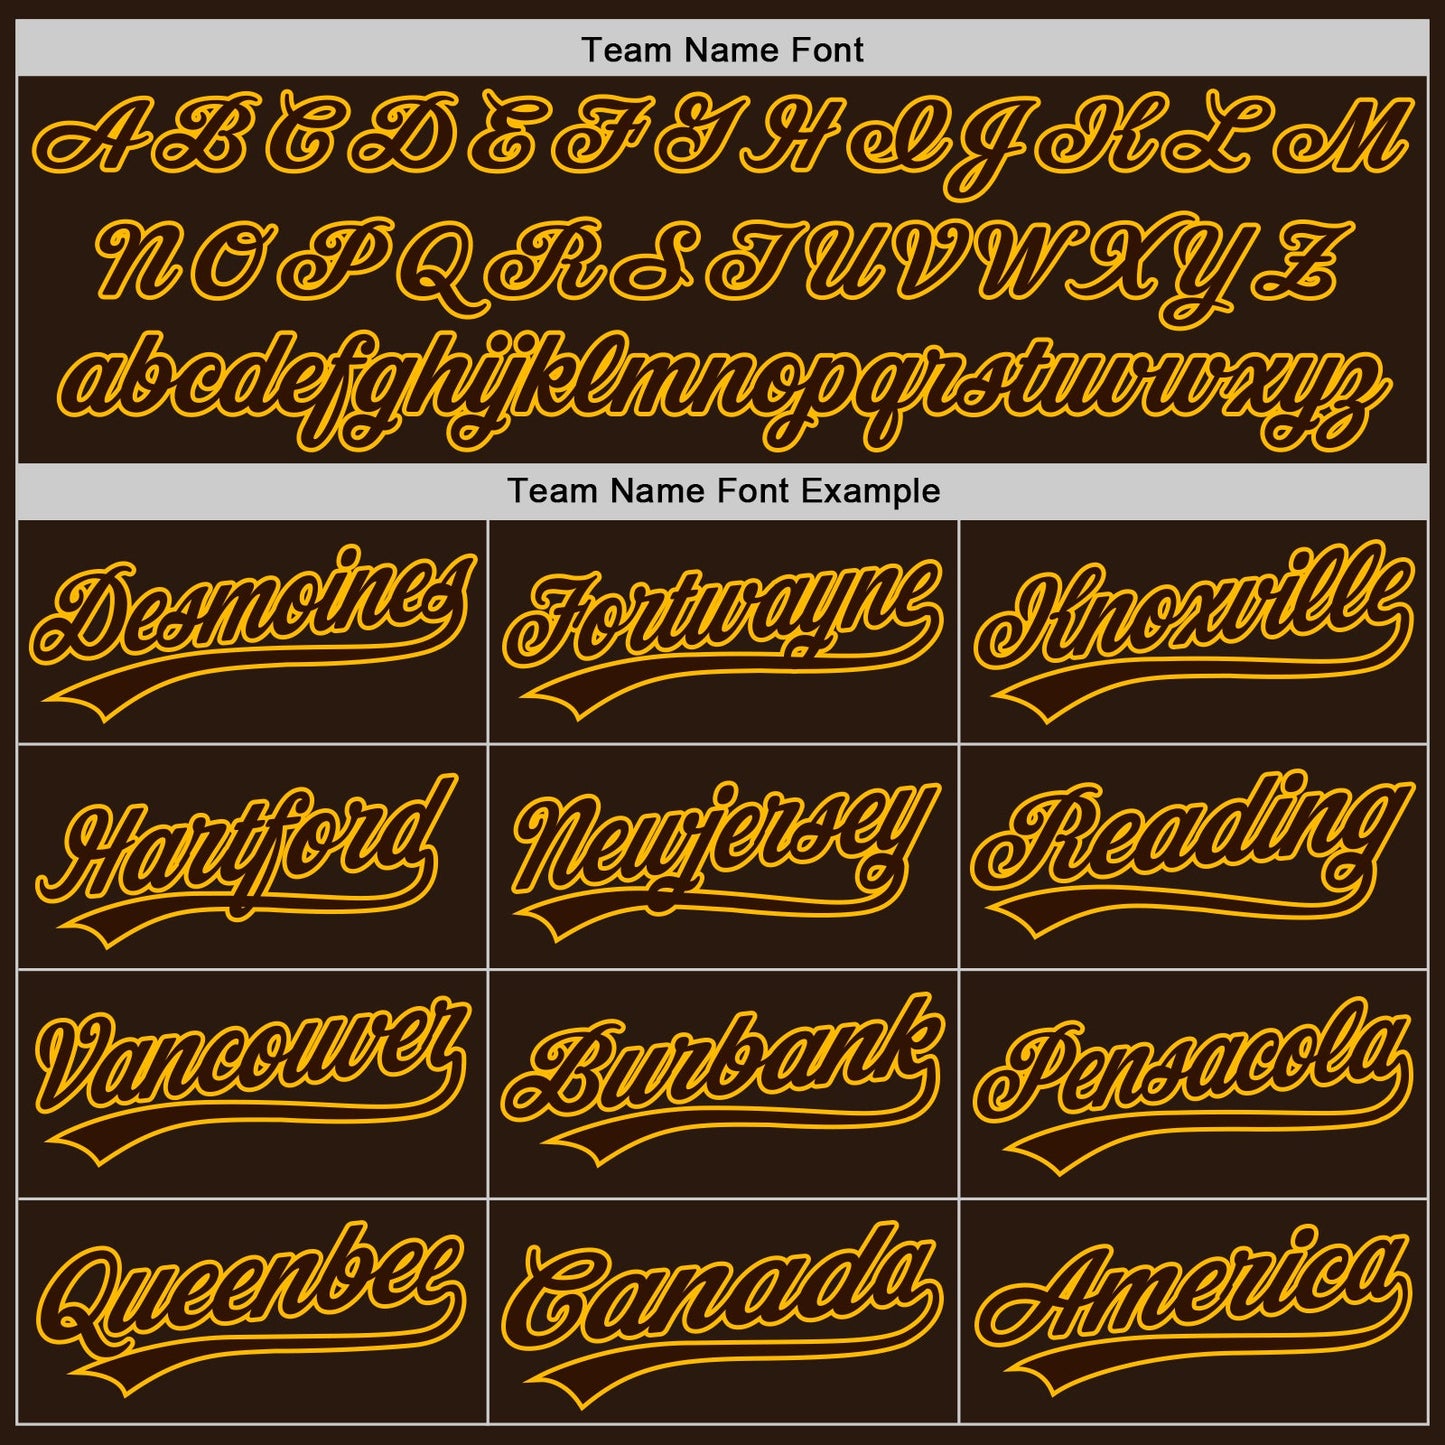 Custom Brown Gold Two-Button Unisex Softball Jersey